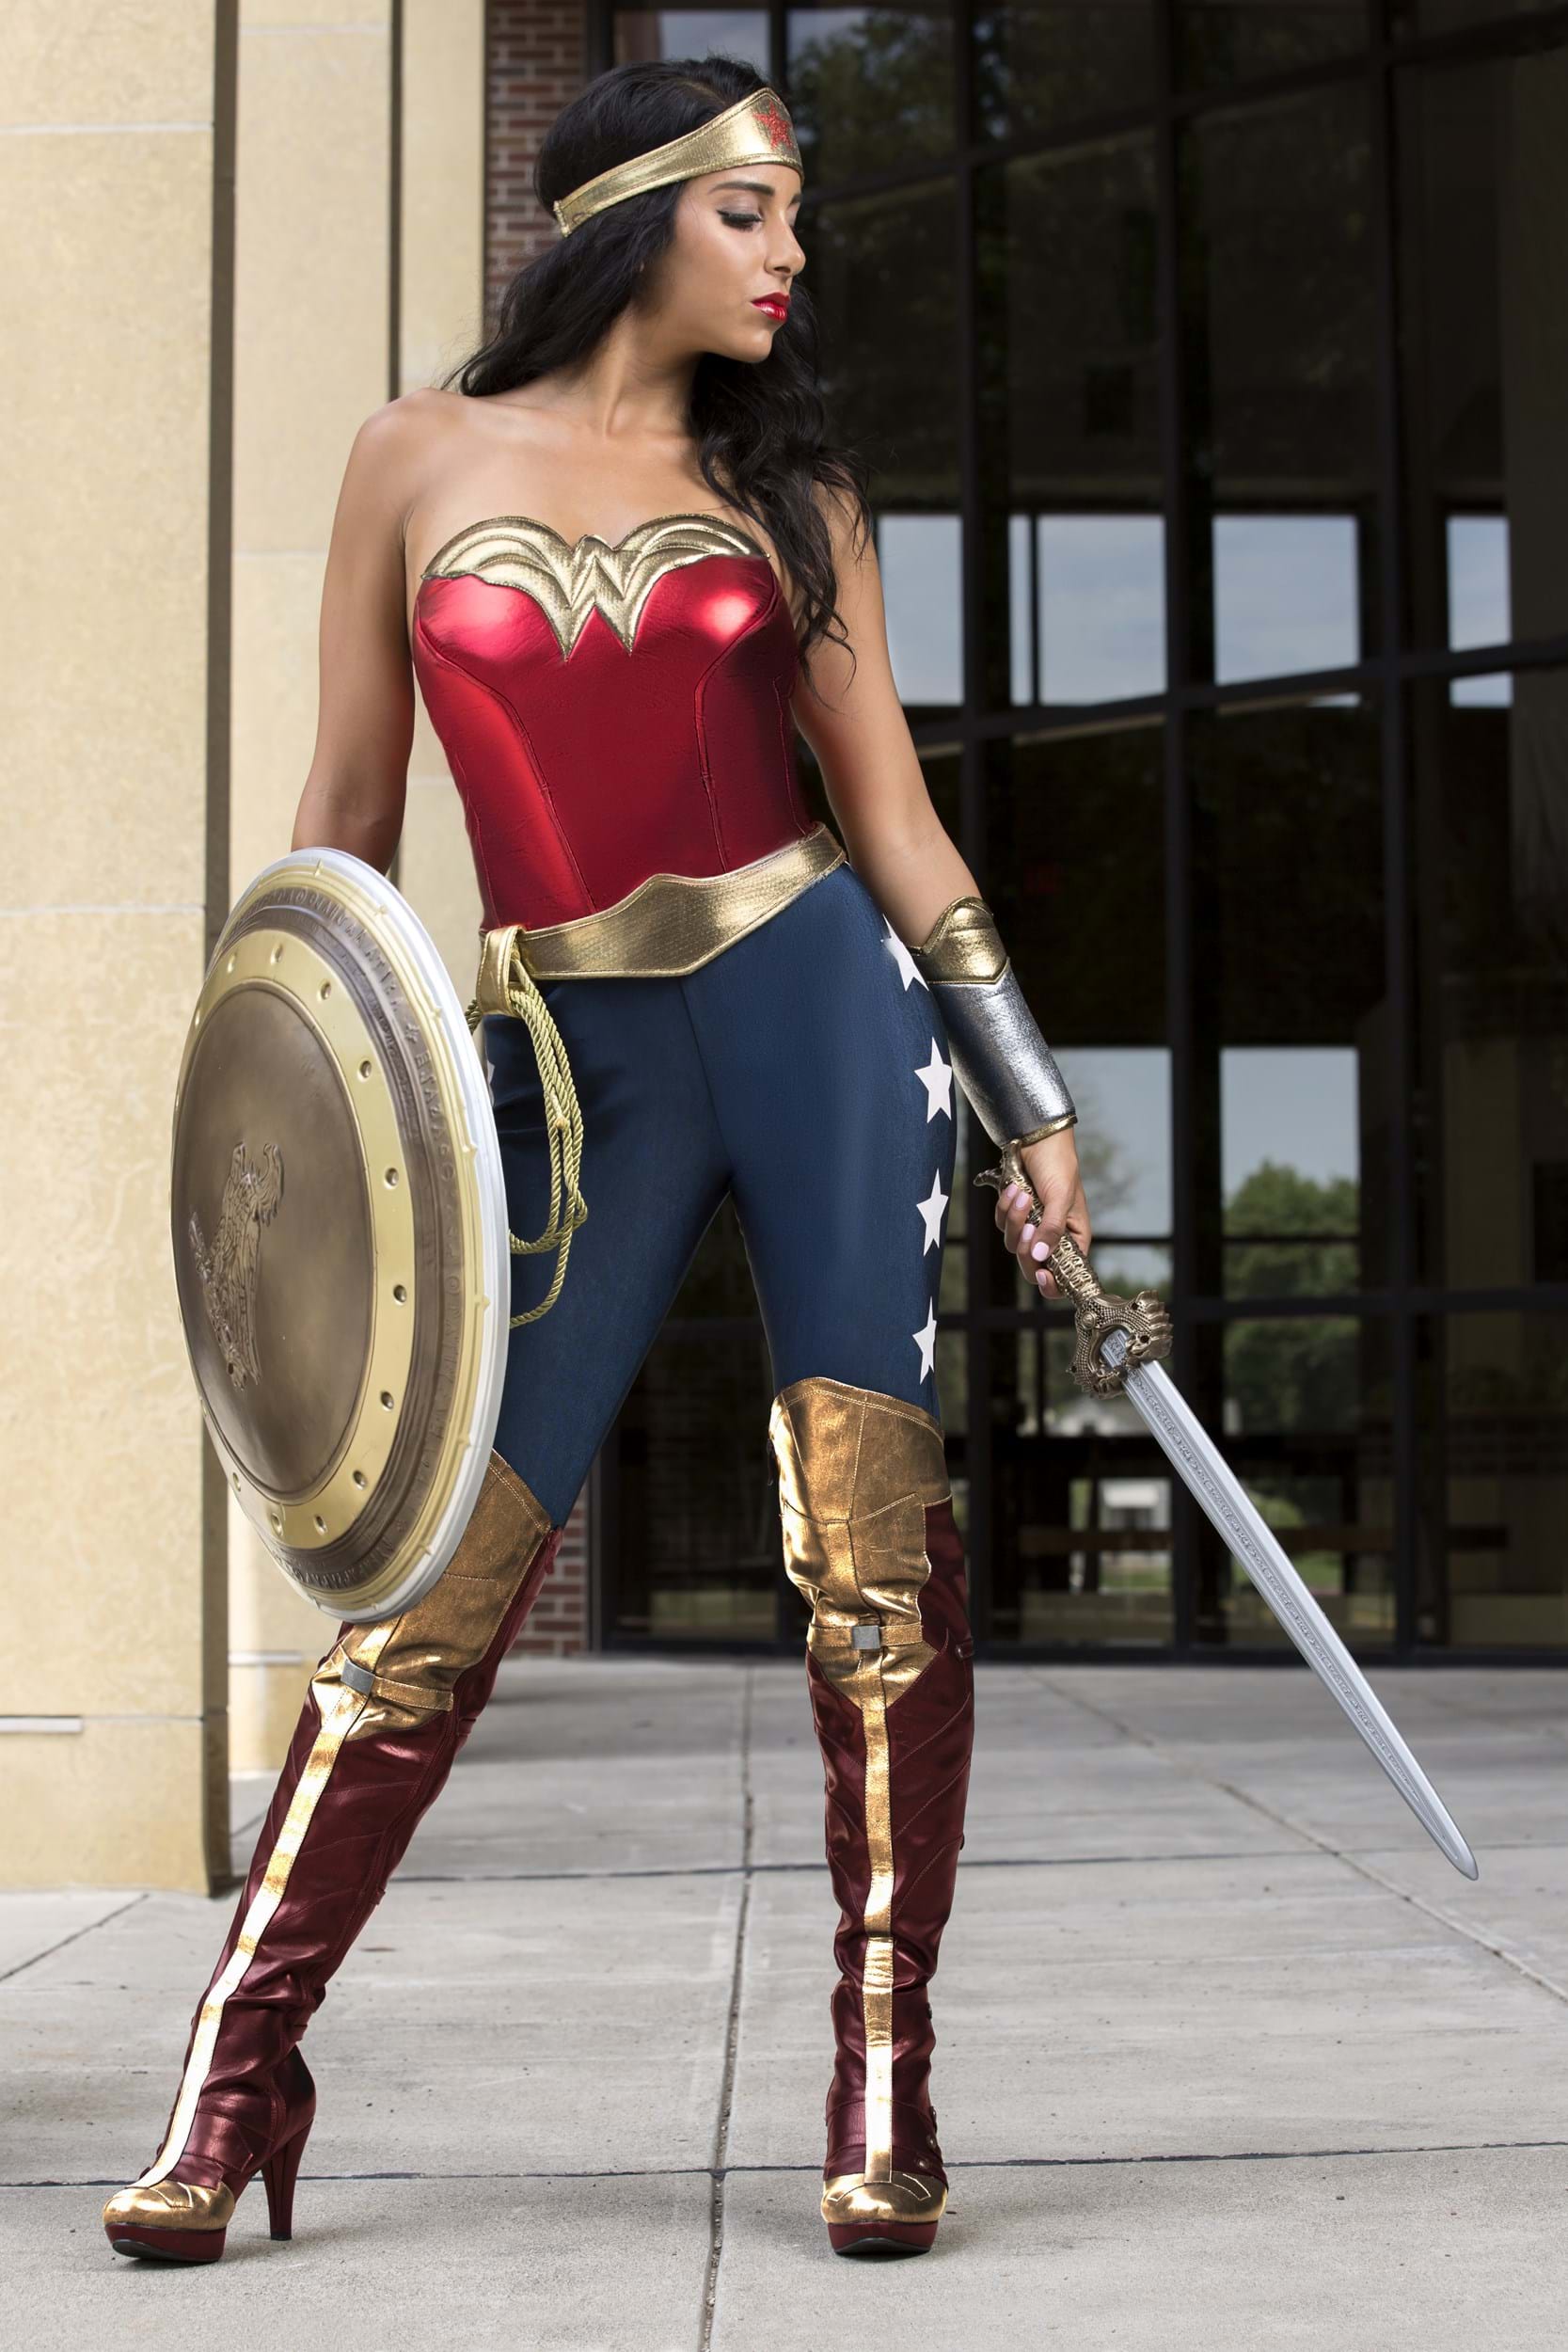 Affordable Wholesale costume latex wonder woman For Fancy Dress 